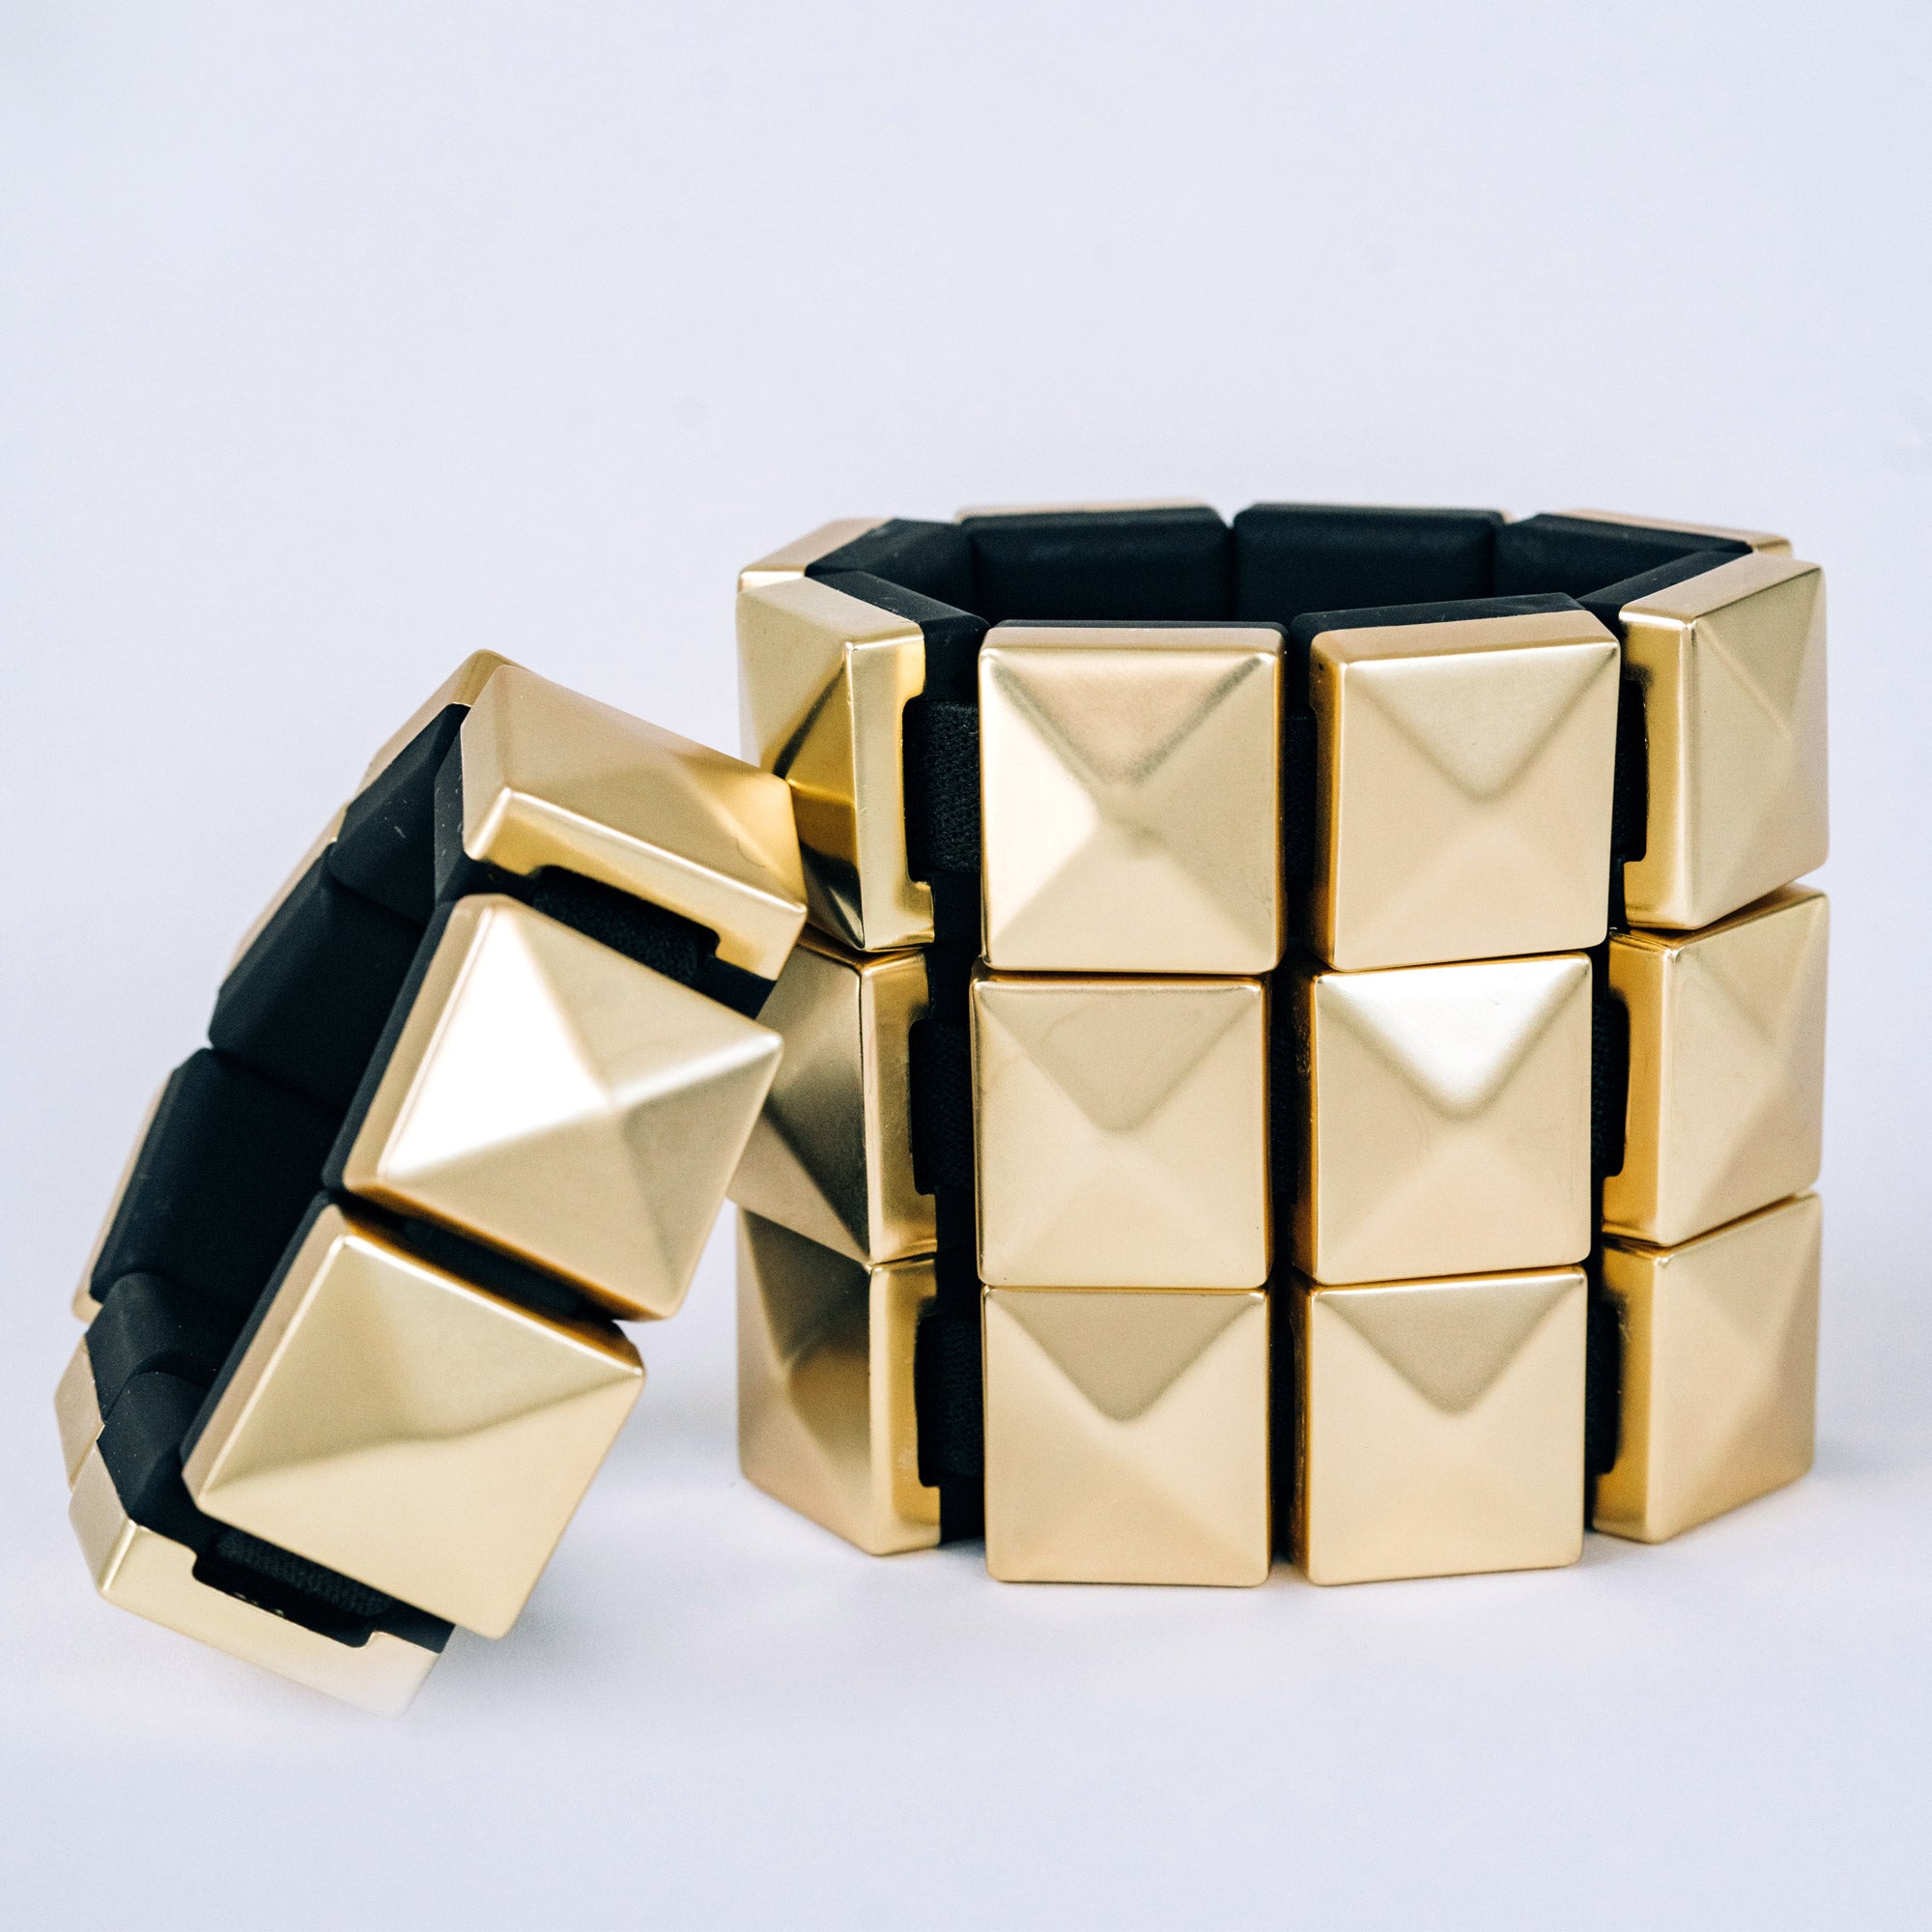 Cali Weights - Weighted Bracelets for Modern Women